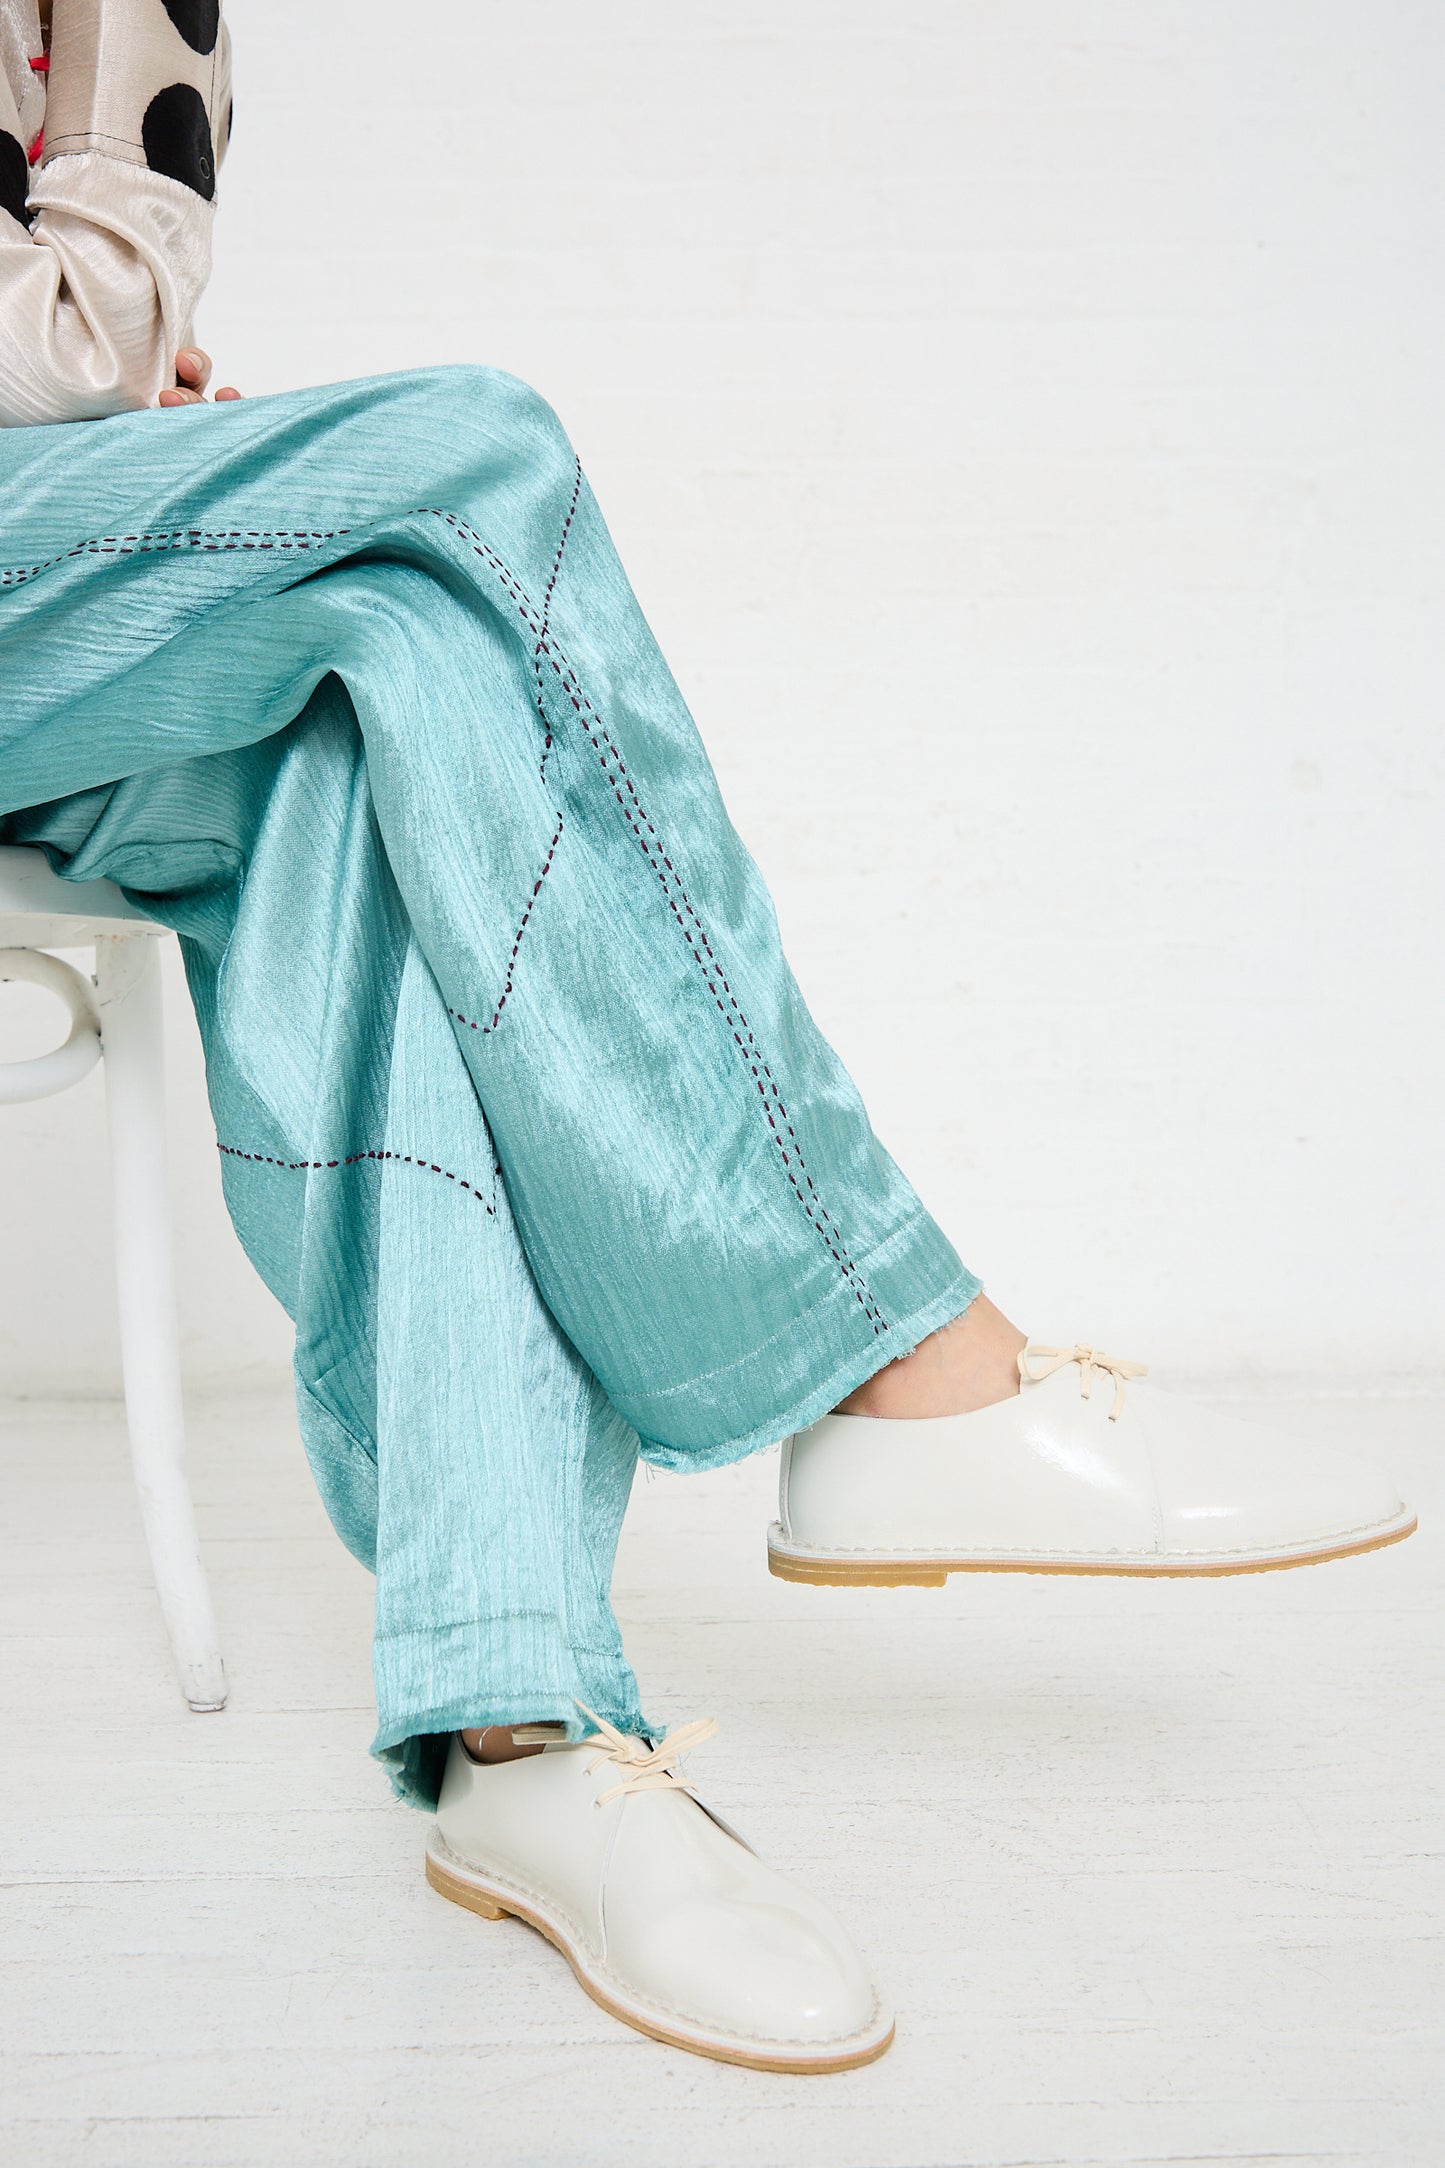 Person sitting on a white chair, wearing turquoise pants with a stitched pattern and sustainably made in Spain Patent Leather Derbie in White by Steve Mono featuring beige soles.